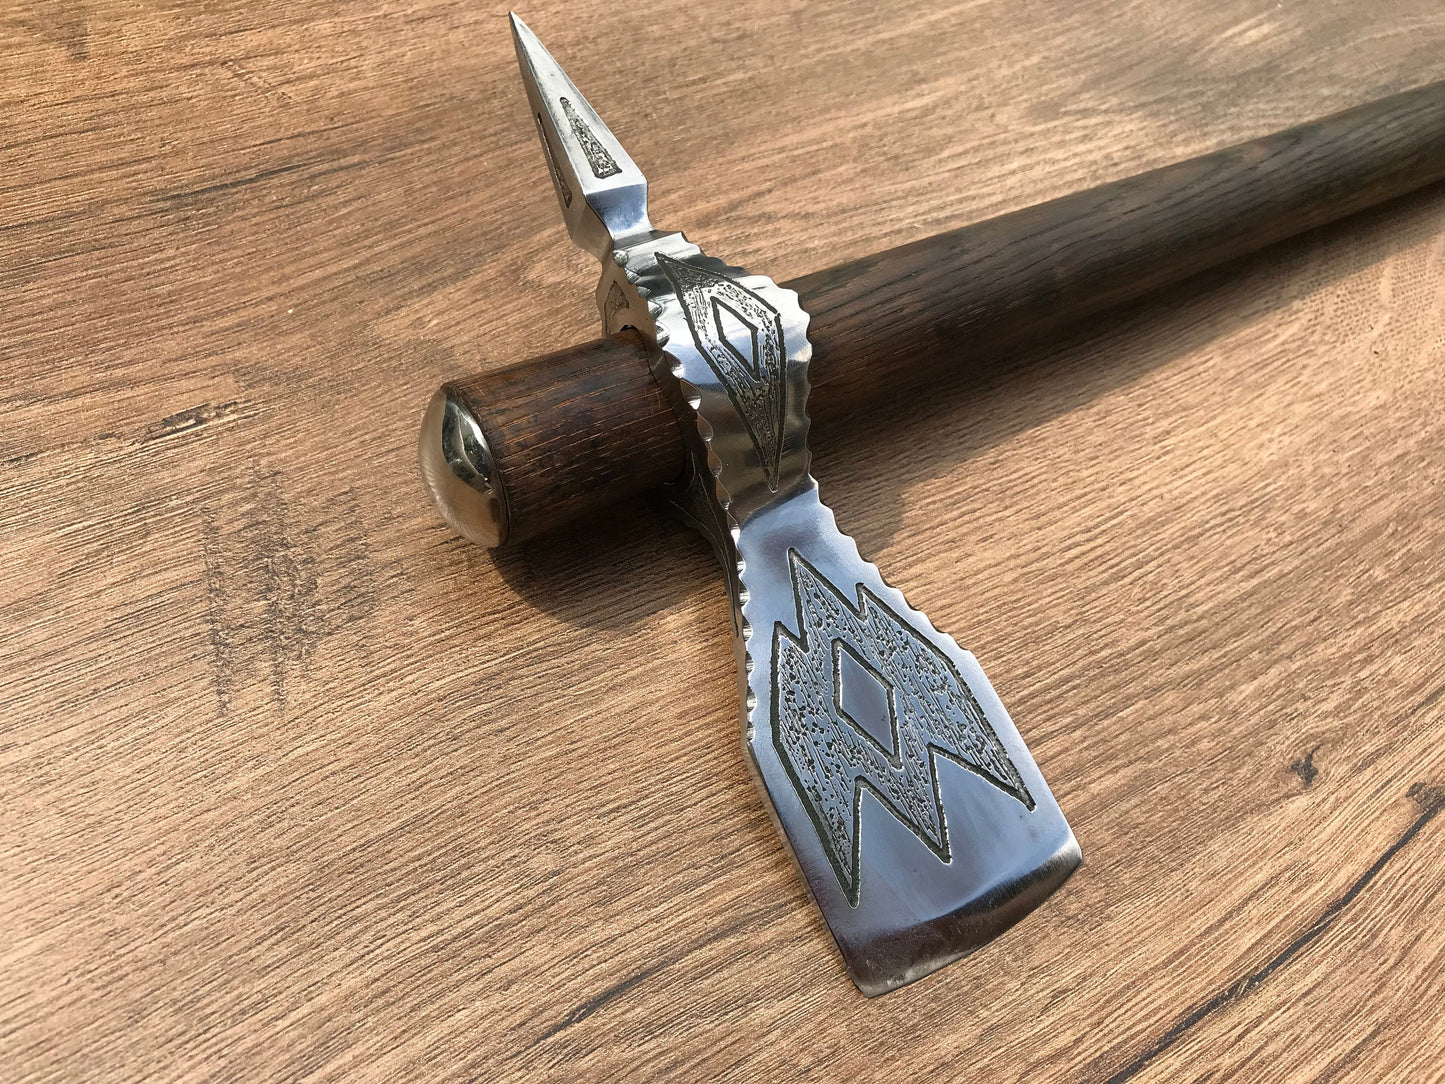 Tomahawk, viking axe, mens gifts, medieval axe, axe, iron gift for him, mens birthday gift, best man gift, viking gift, camp axe, axe gift